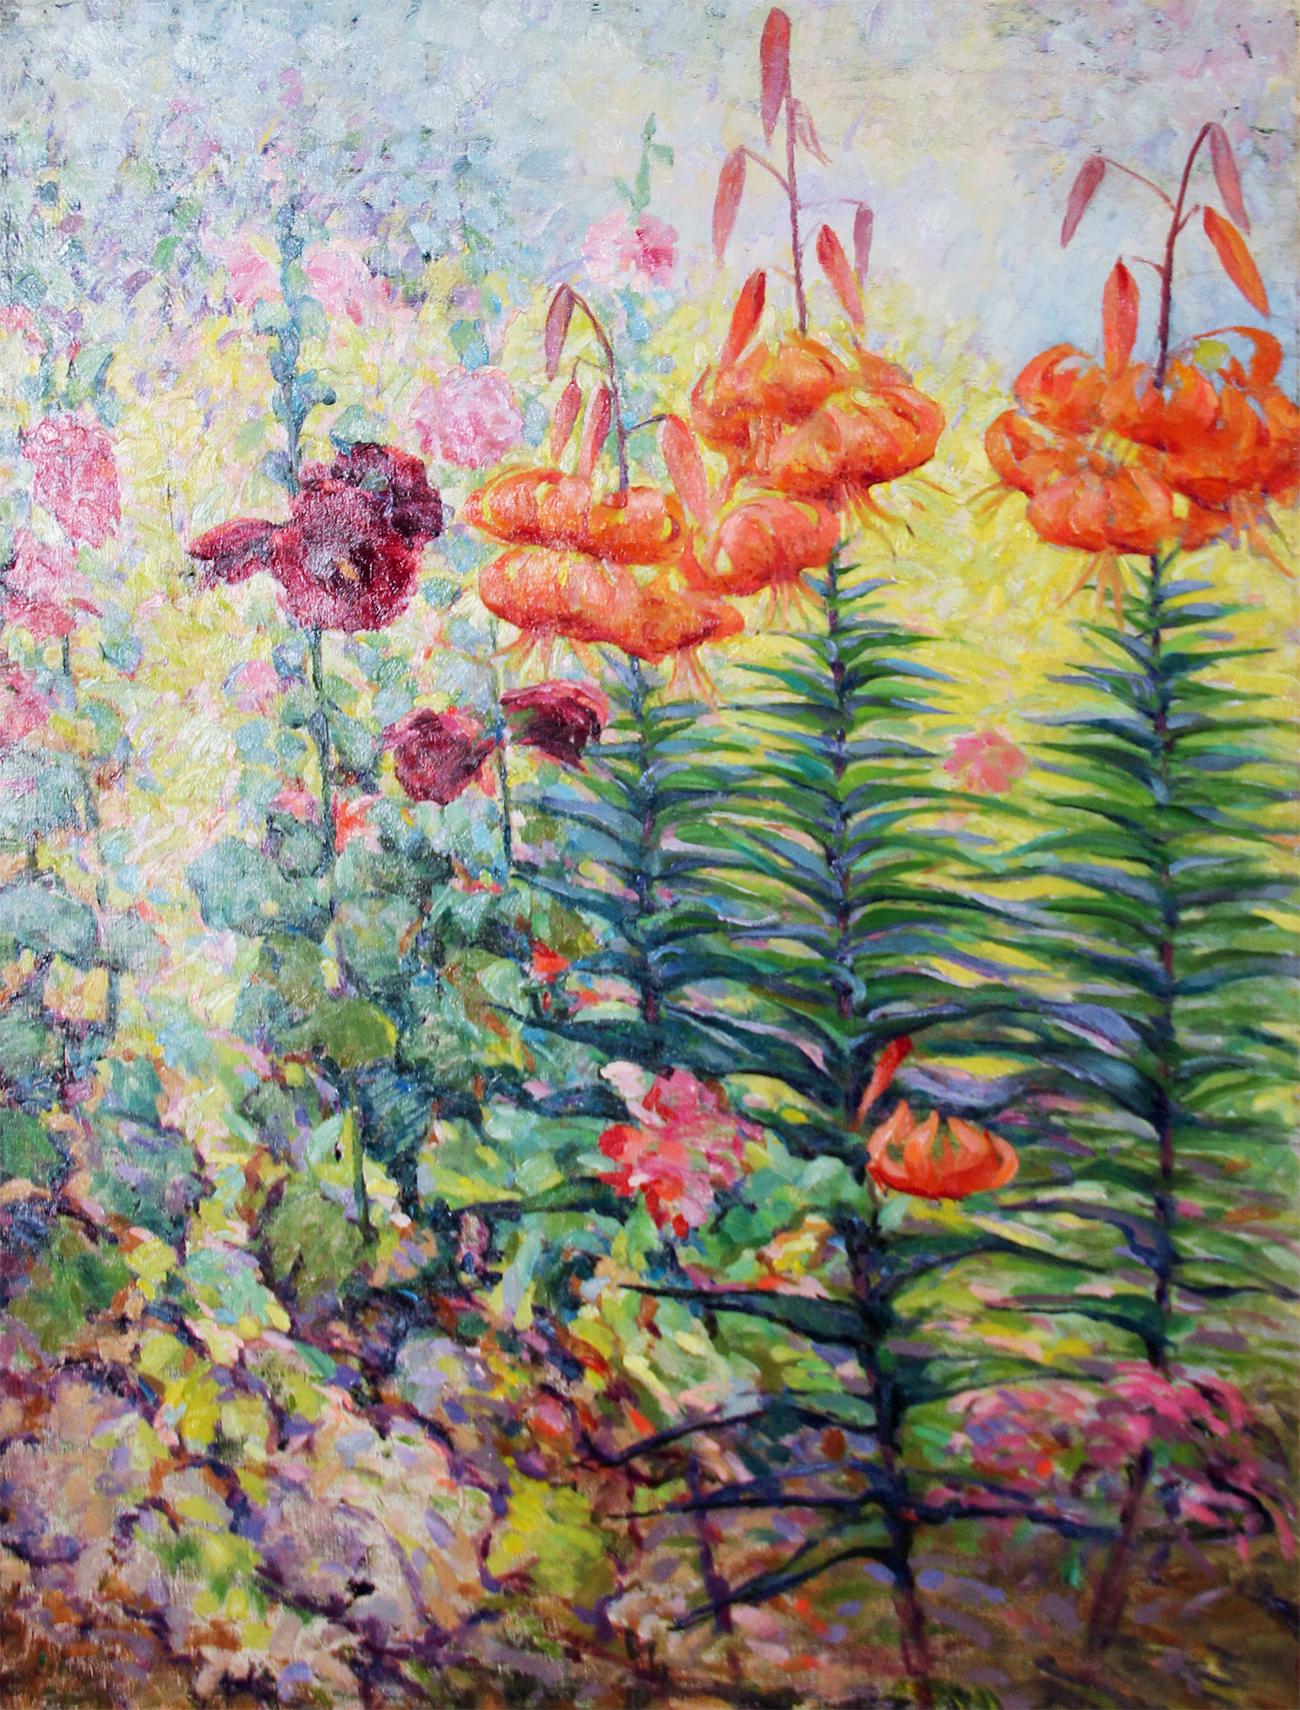 Tiger Lillies, American Impressionist Floral Landscape, Oil on Canvas, Signed - Painting by Henry Ryan MacGinnis